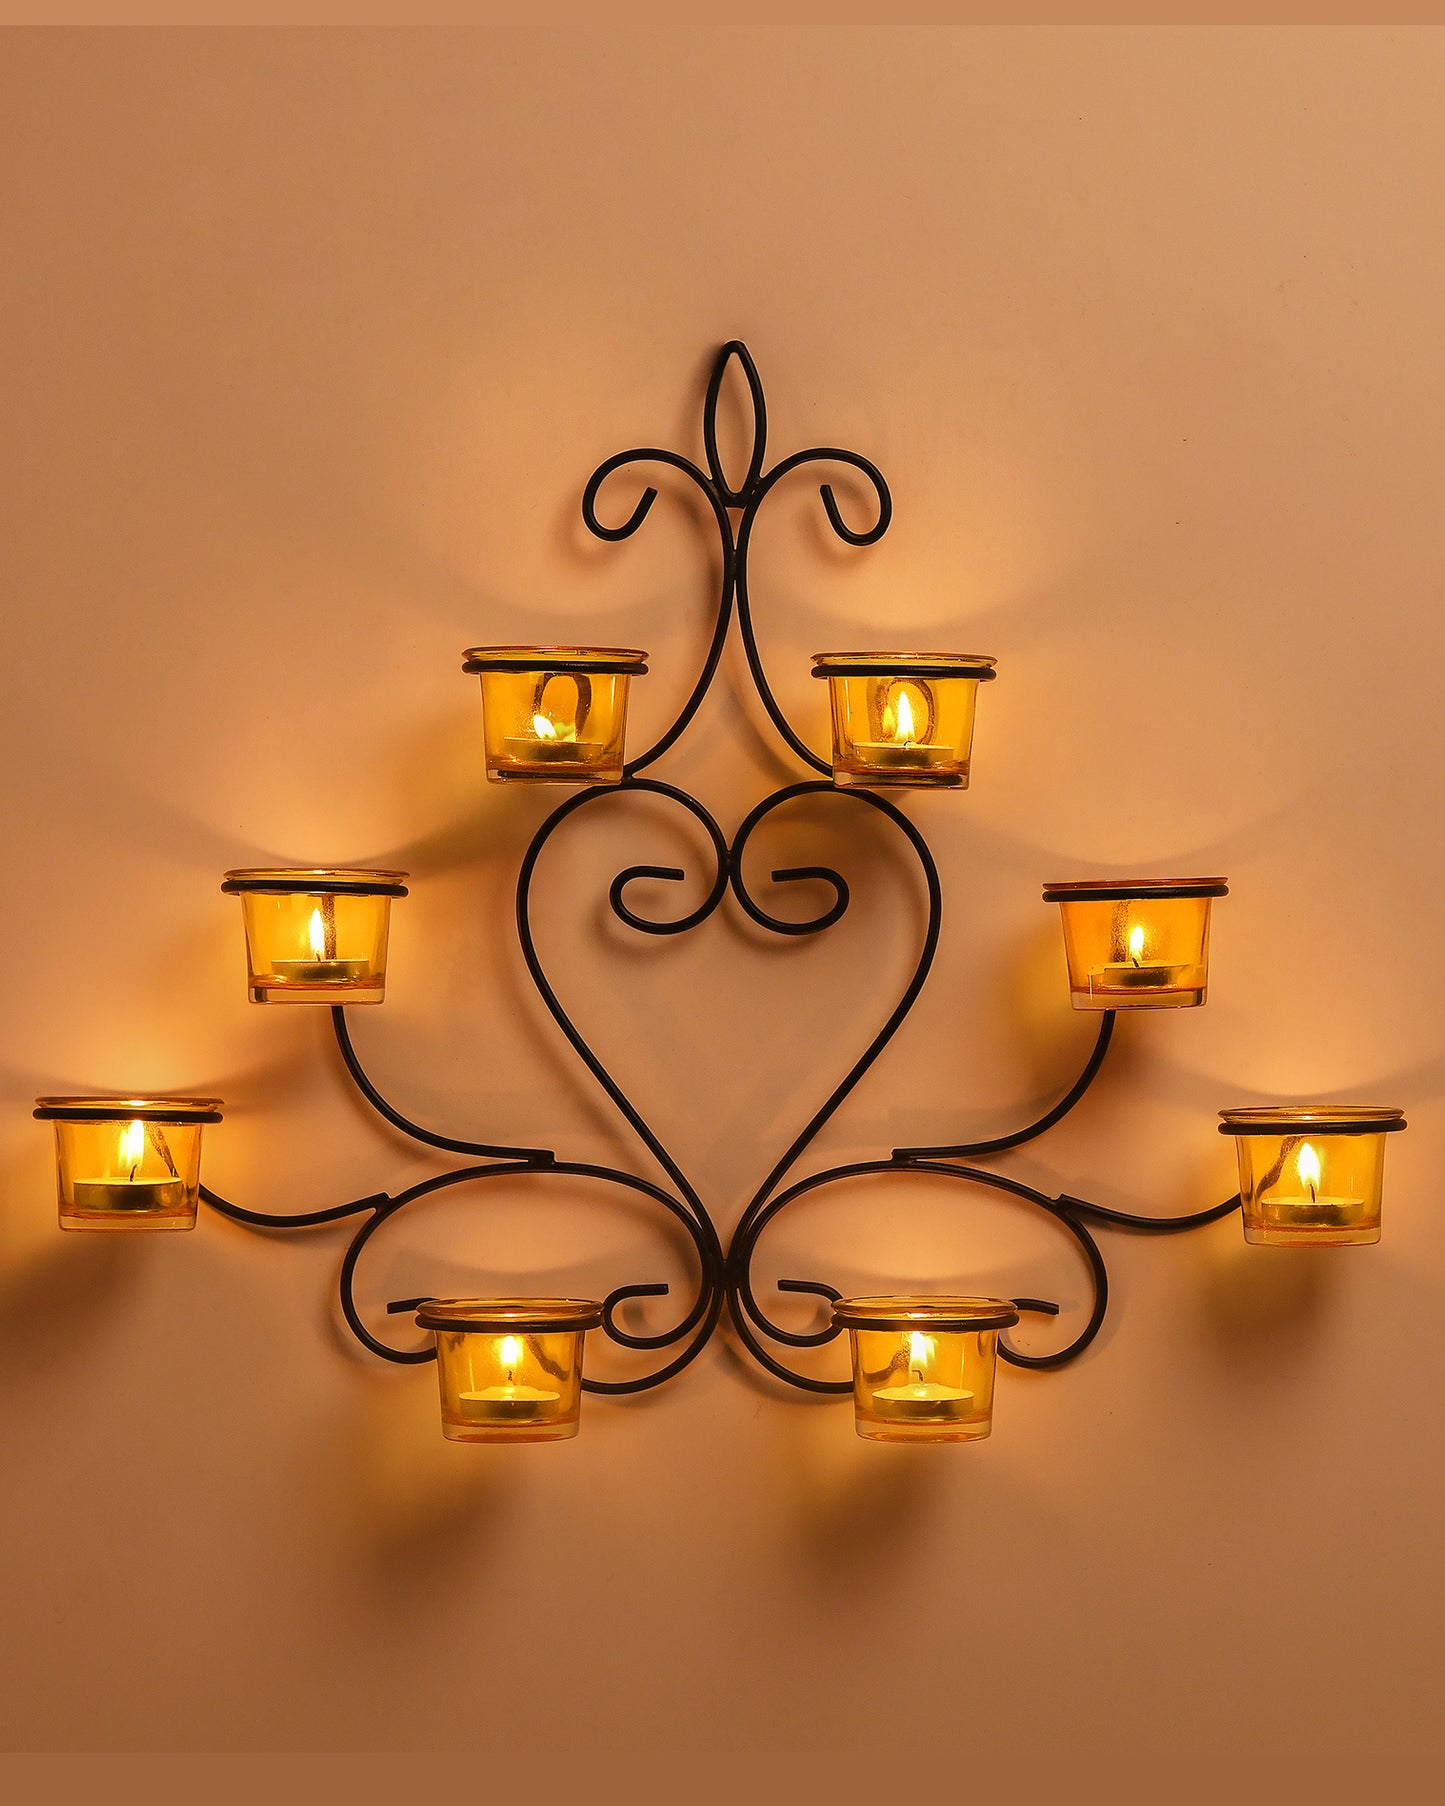 8-Votive Chic Black Iron Wall Sconce Candle Holder, Candle Wall art